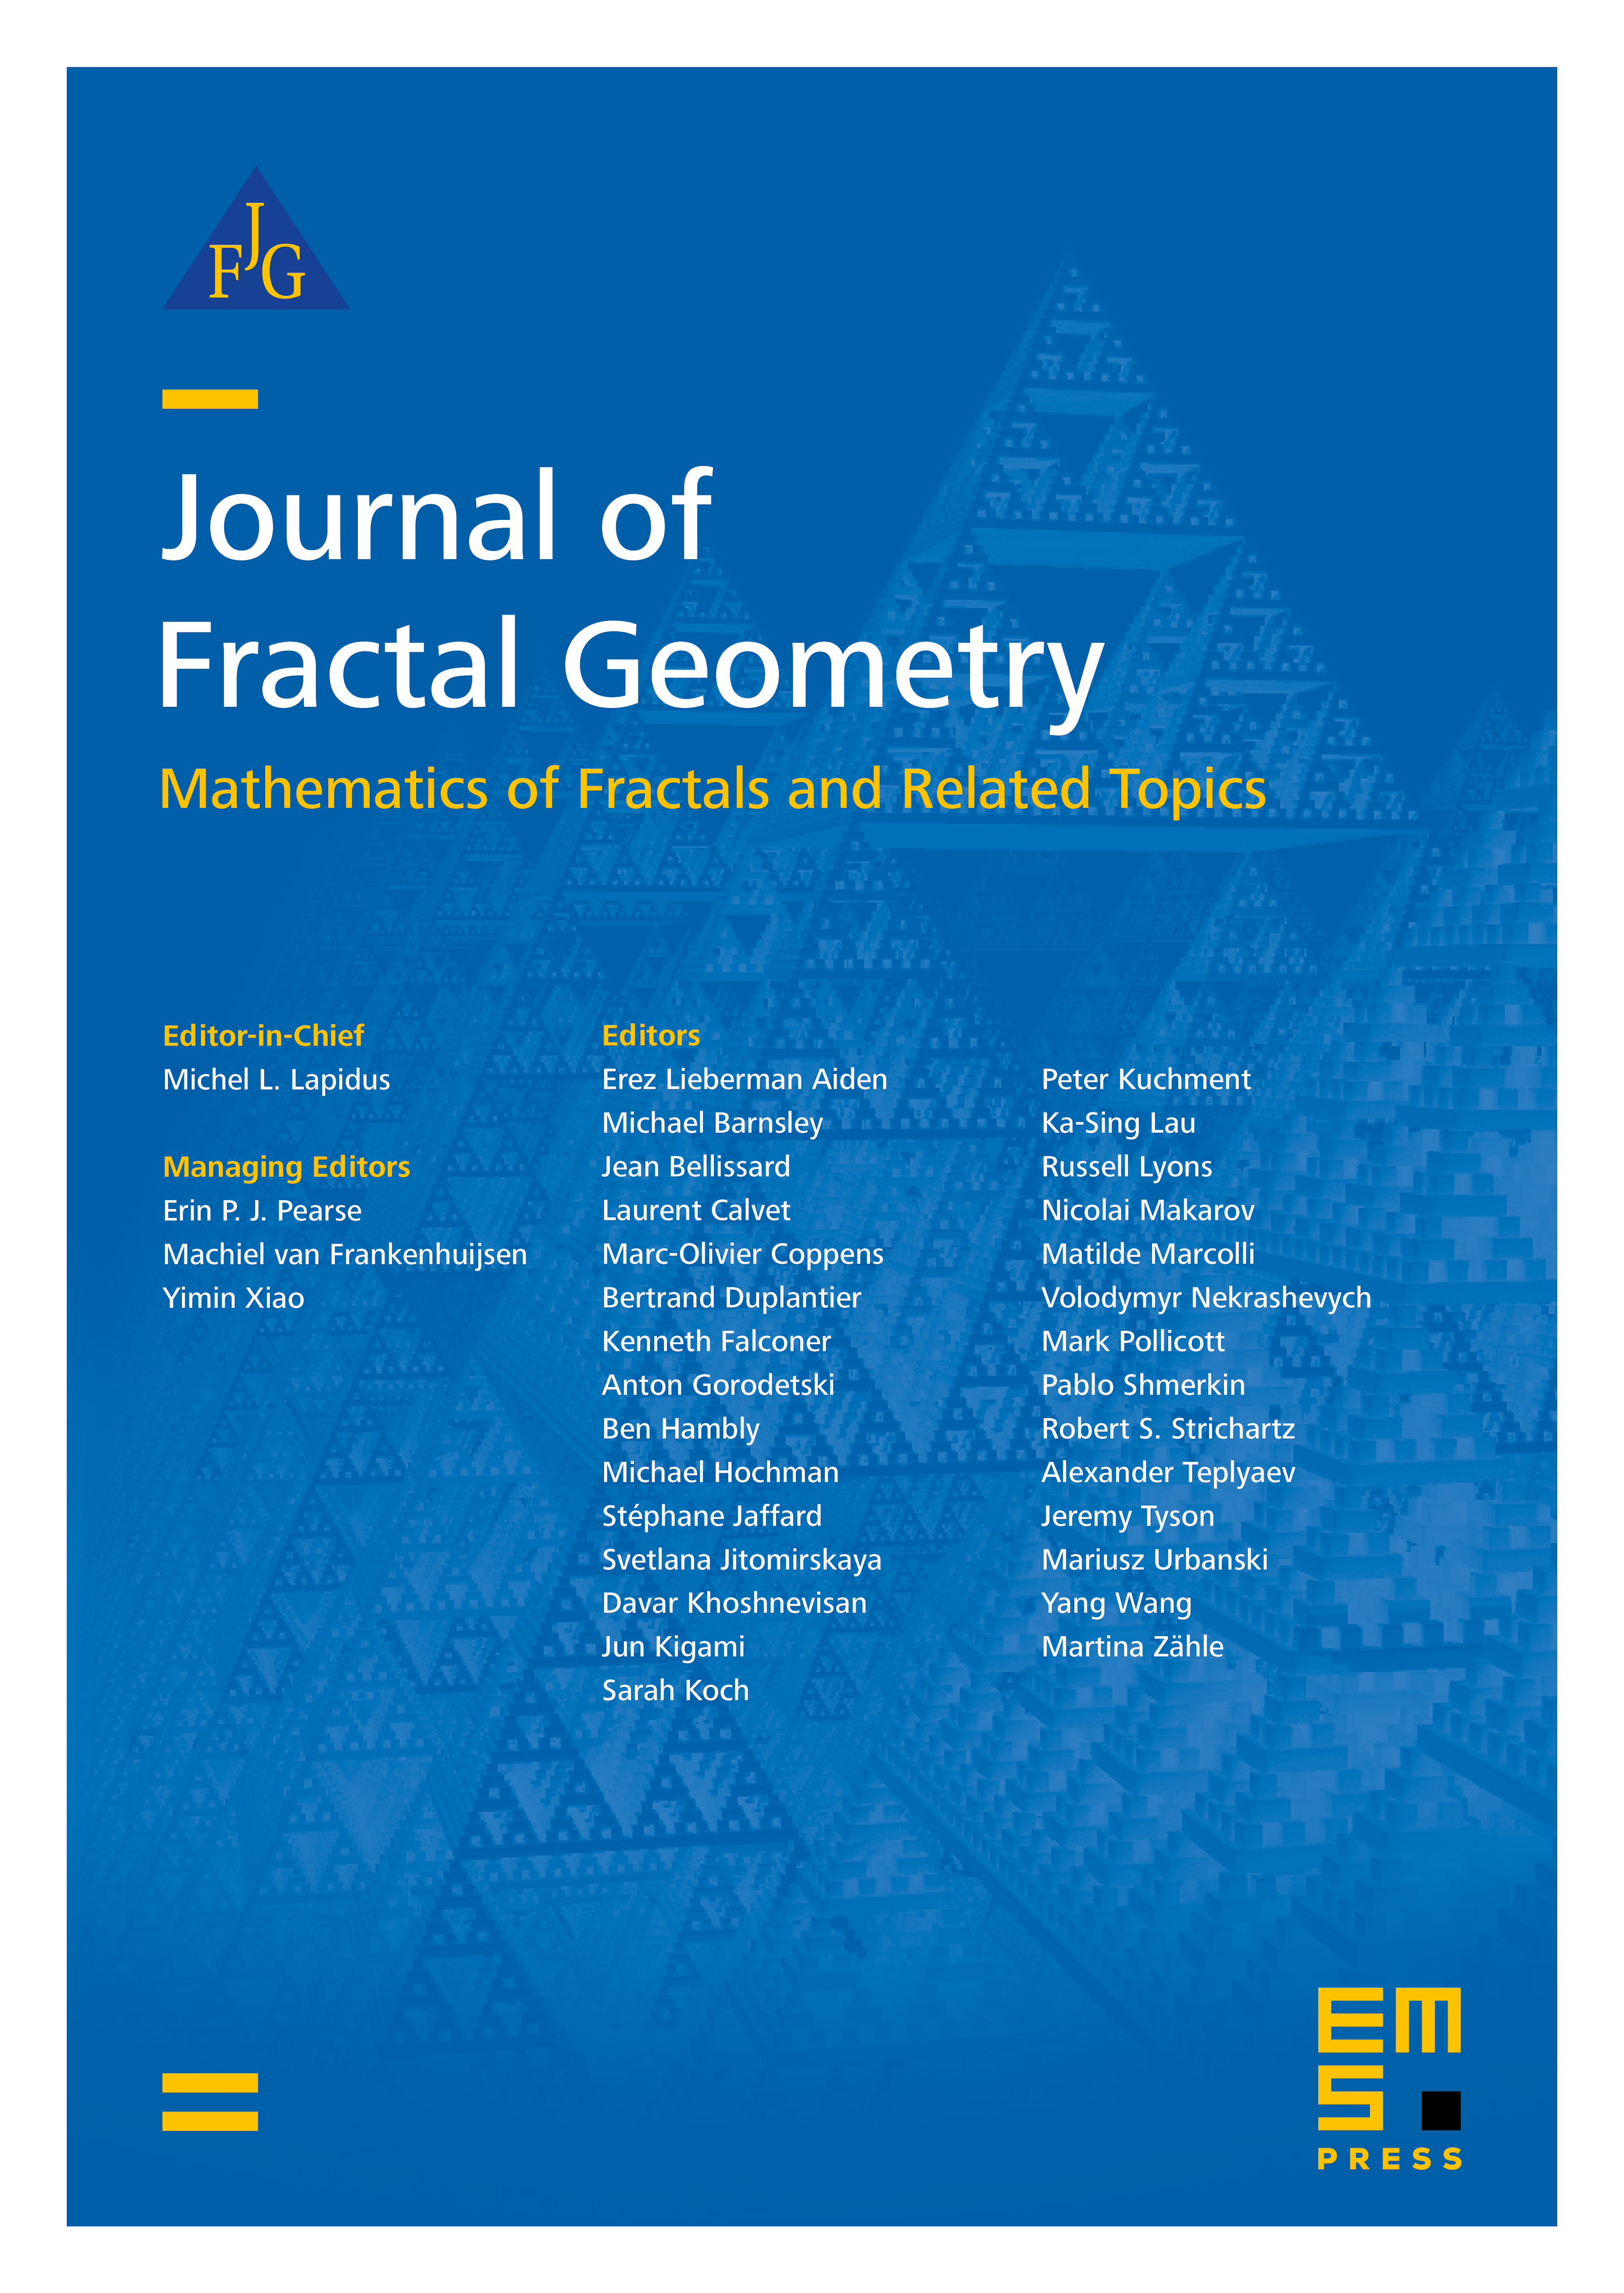 Iterated function systems based on the degree of nondensifiability cover